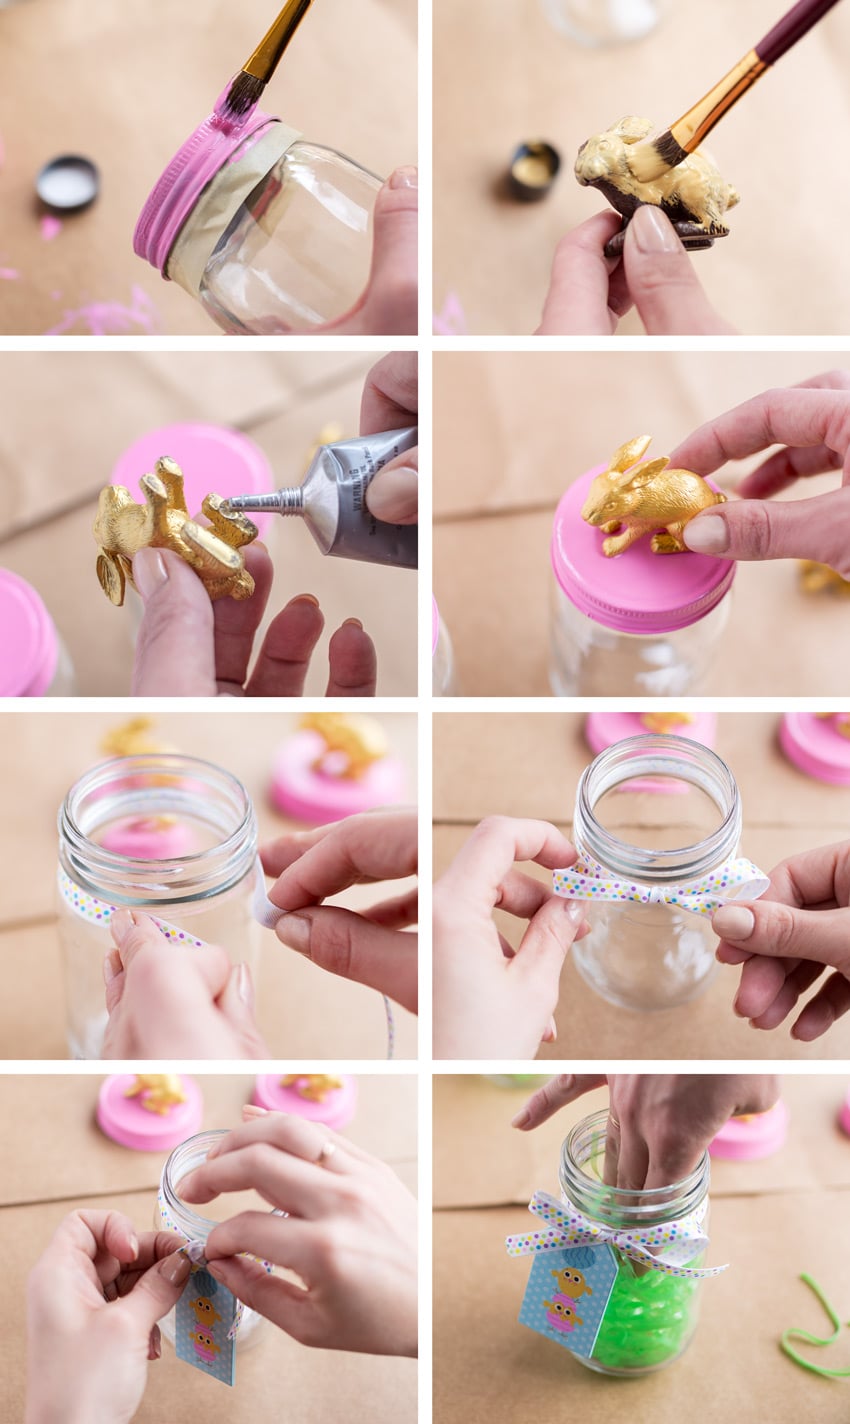 https://poshinprogress.com/wp-content/uploads/2017/02/how-to-make-this-cute-bunny-candy-jar-for-easy-diy-easter-decor-02.jpg